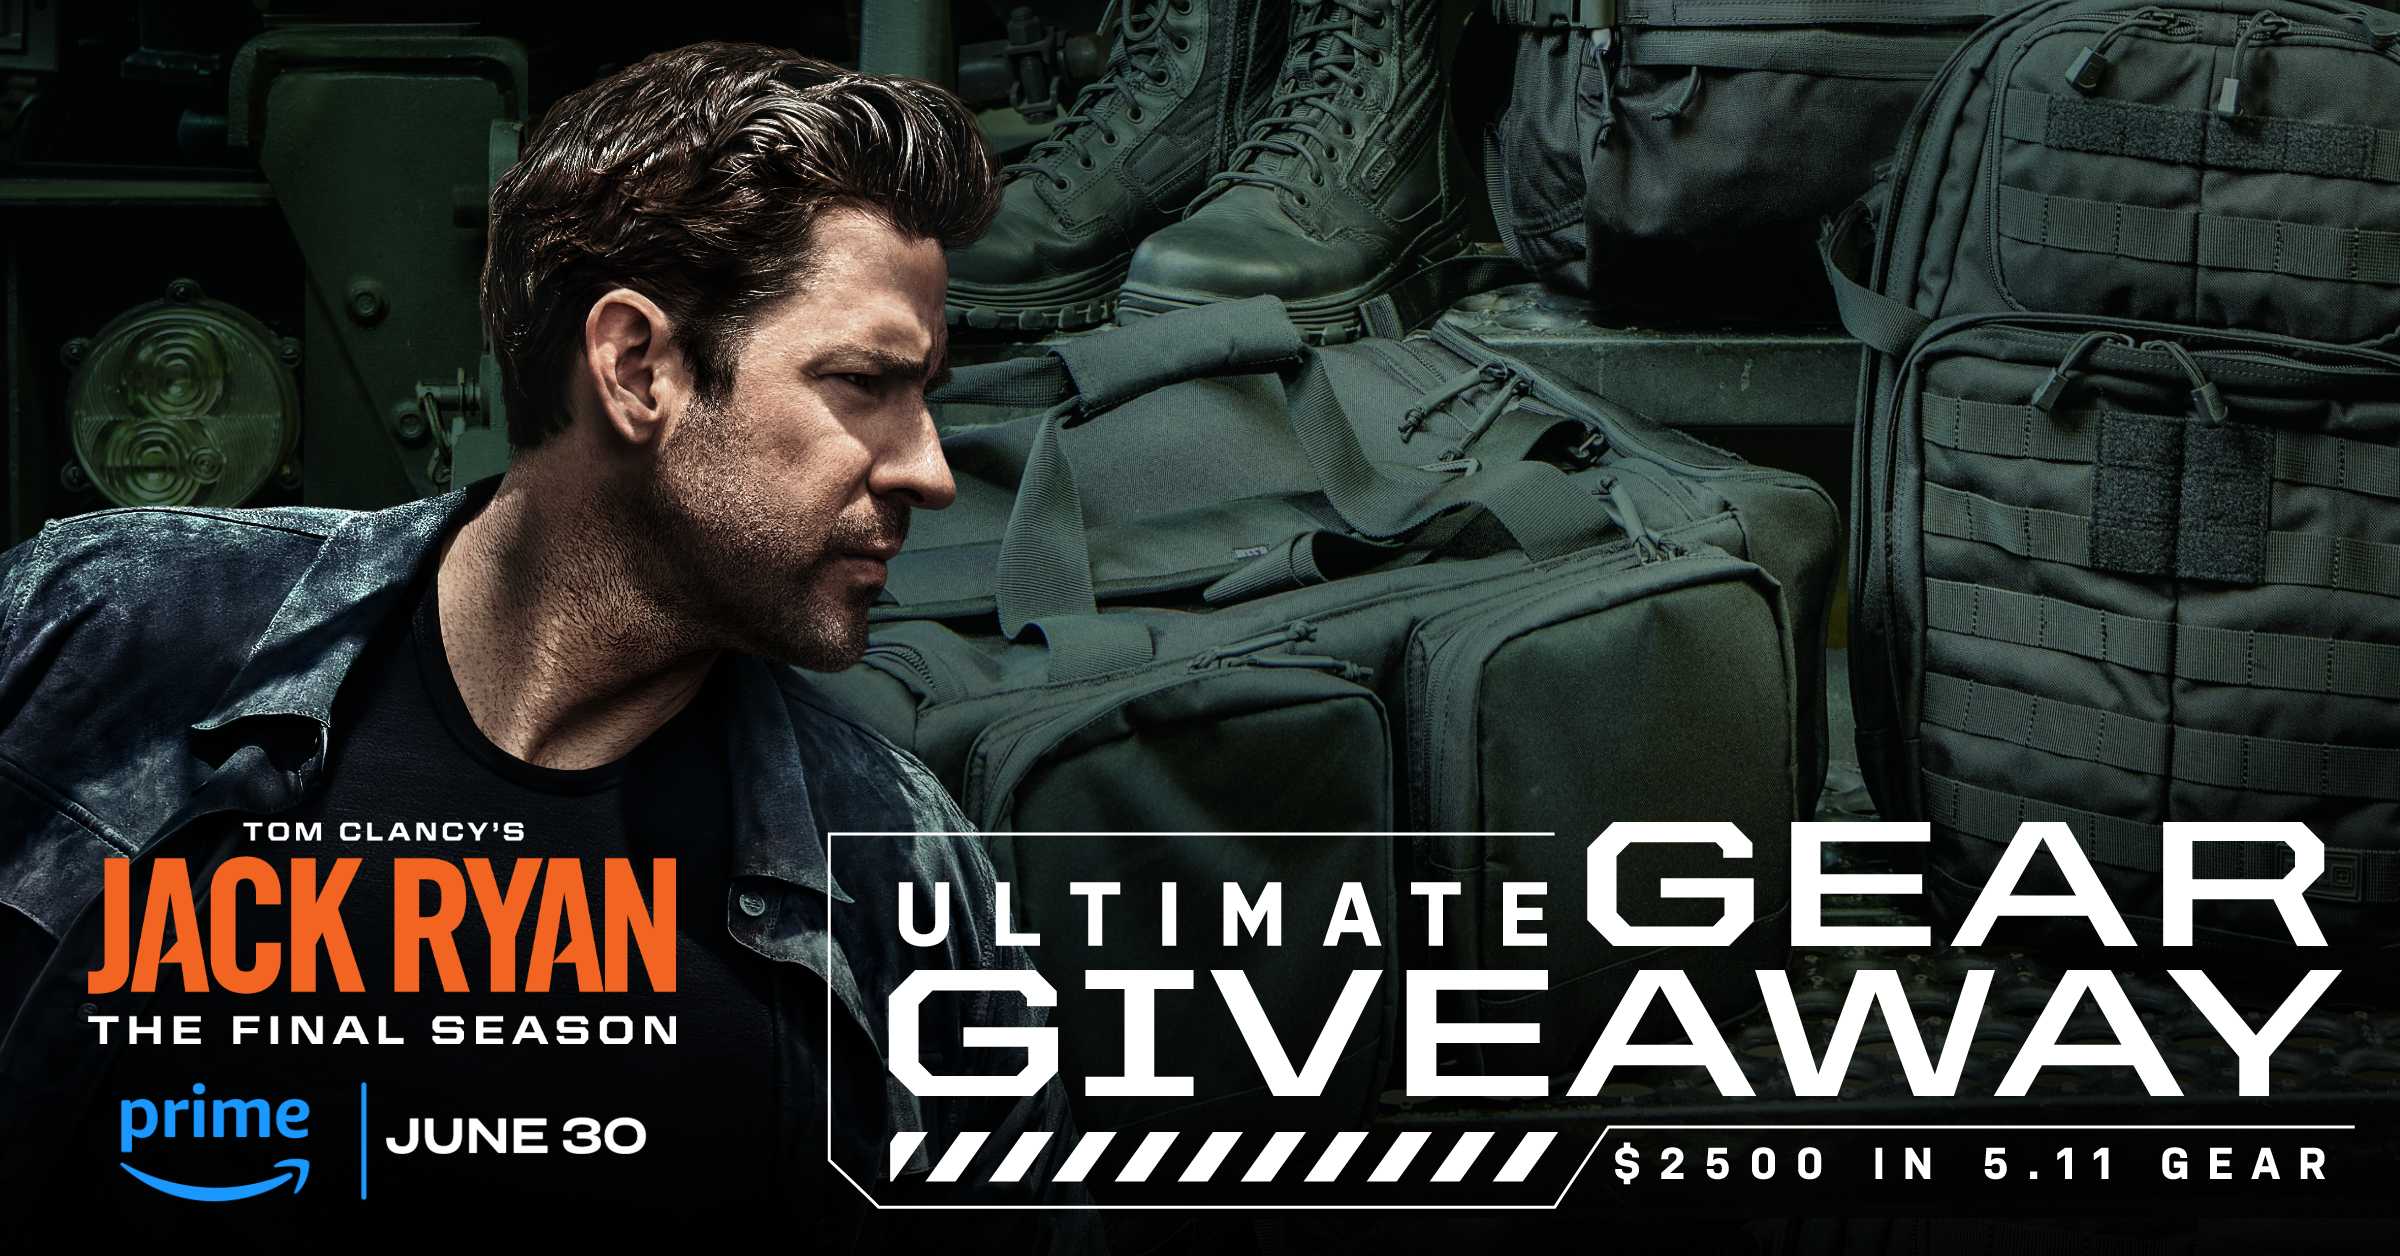 5.11 Tactical and Prime Video to Celebrate the Fourth and Final Season of Tom Clancy’s Jack Ryan with a Specialized Sweepstakes Prize Package and Exclusive Content Series